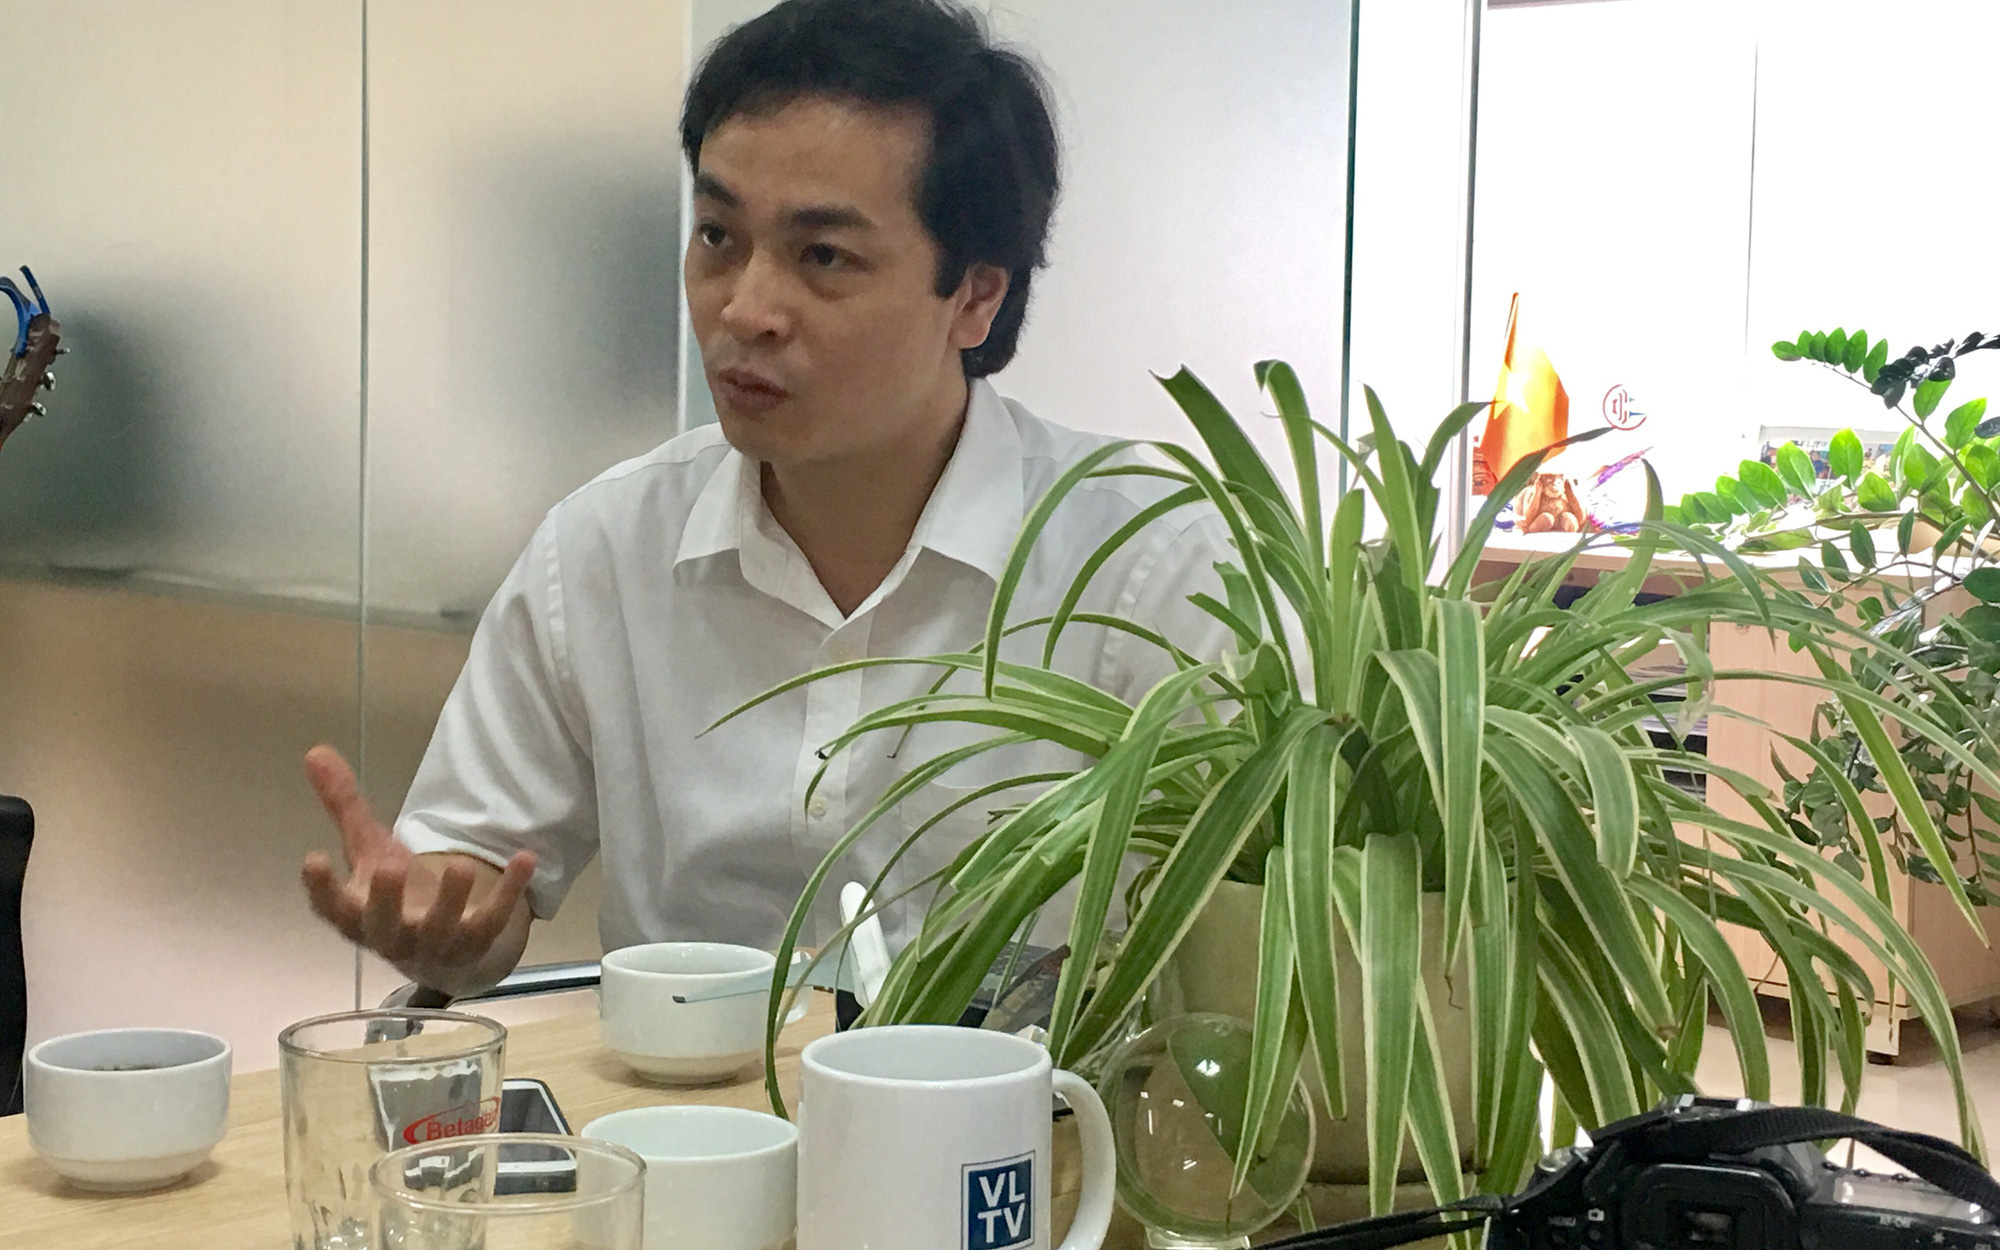 Assoc. Prof. Dr. Ngo Duc Thanh – “passionate” scientist in meteorology and climate change research